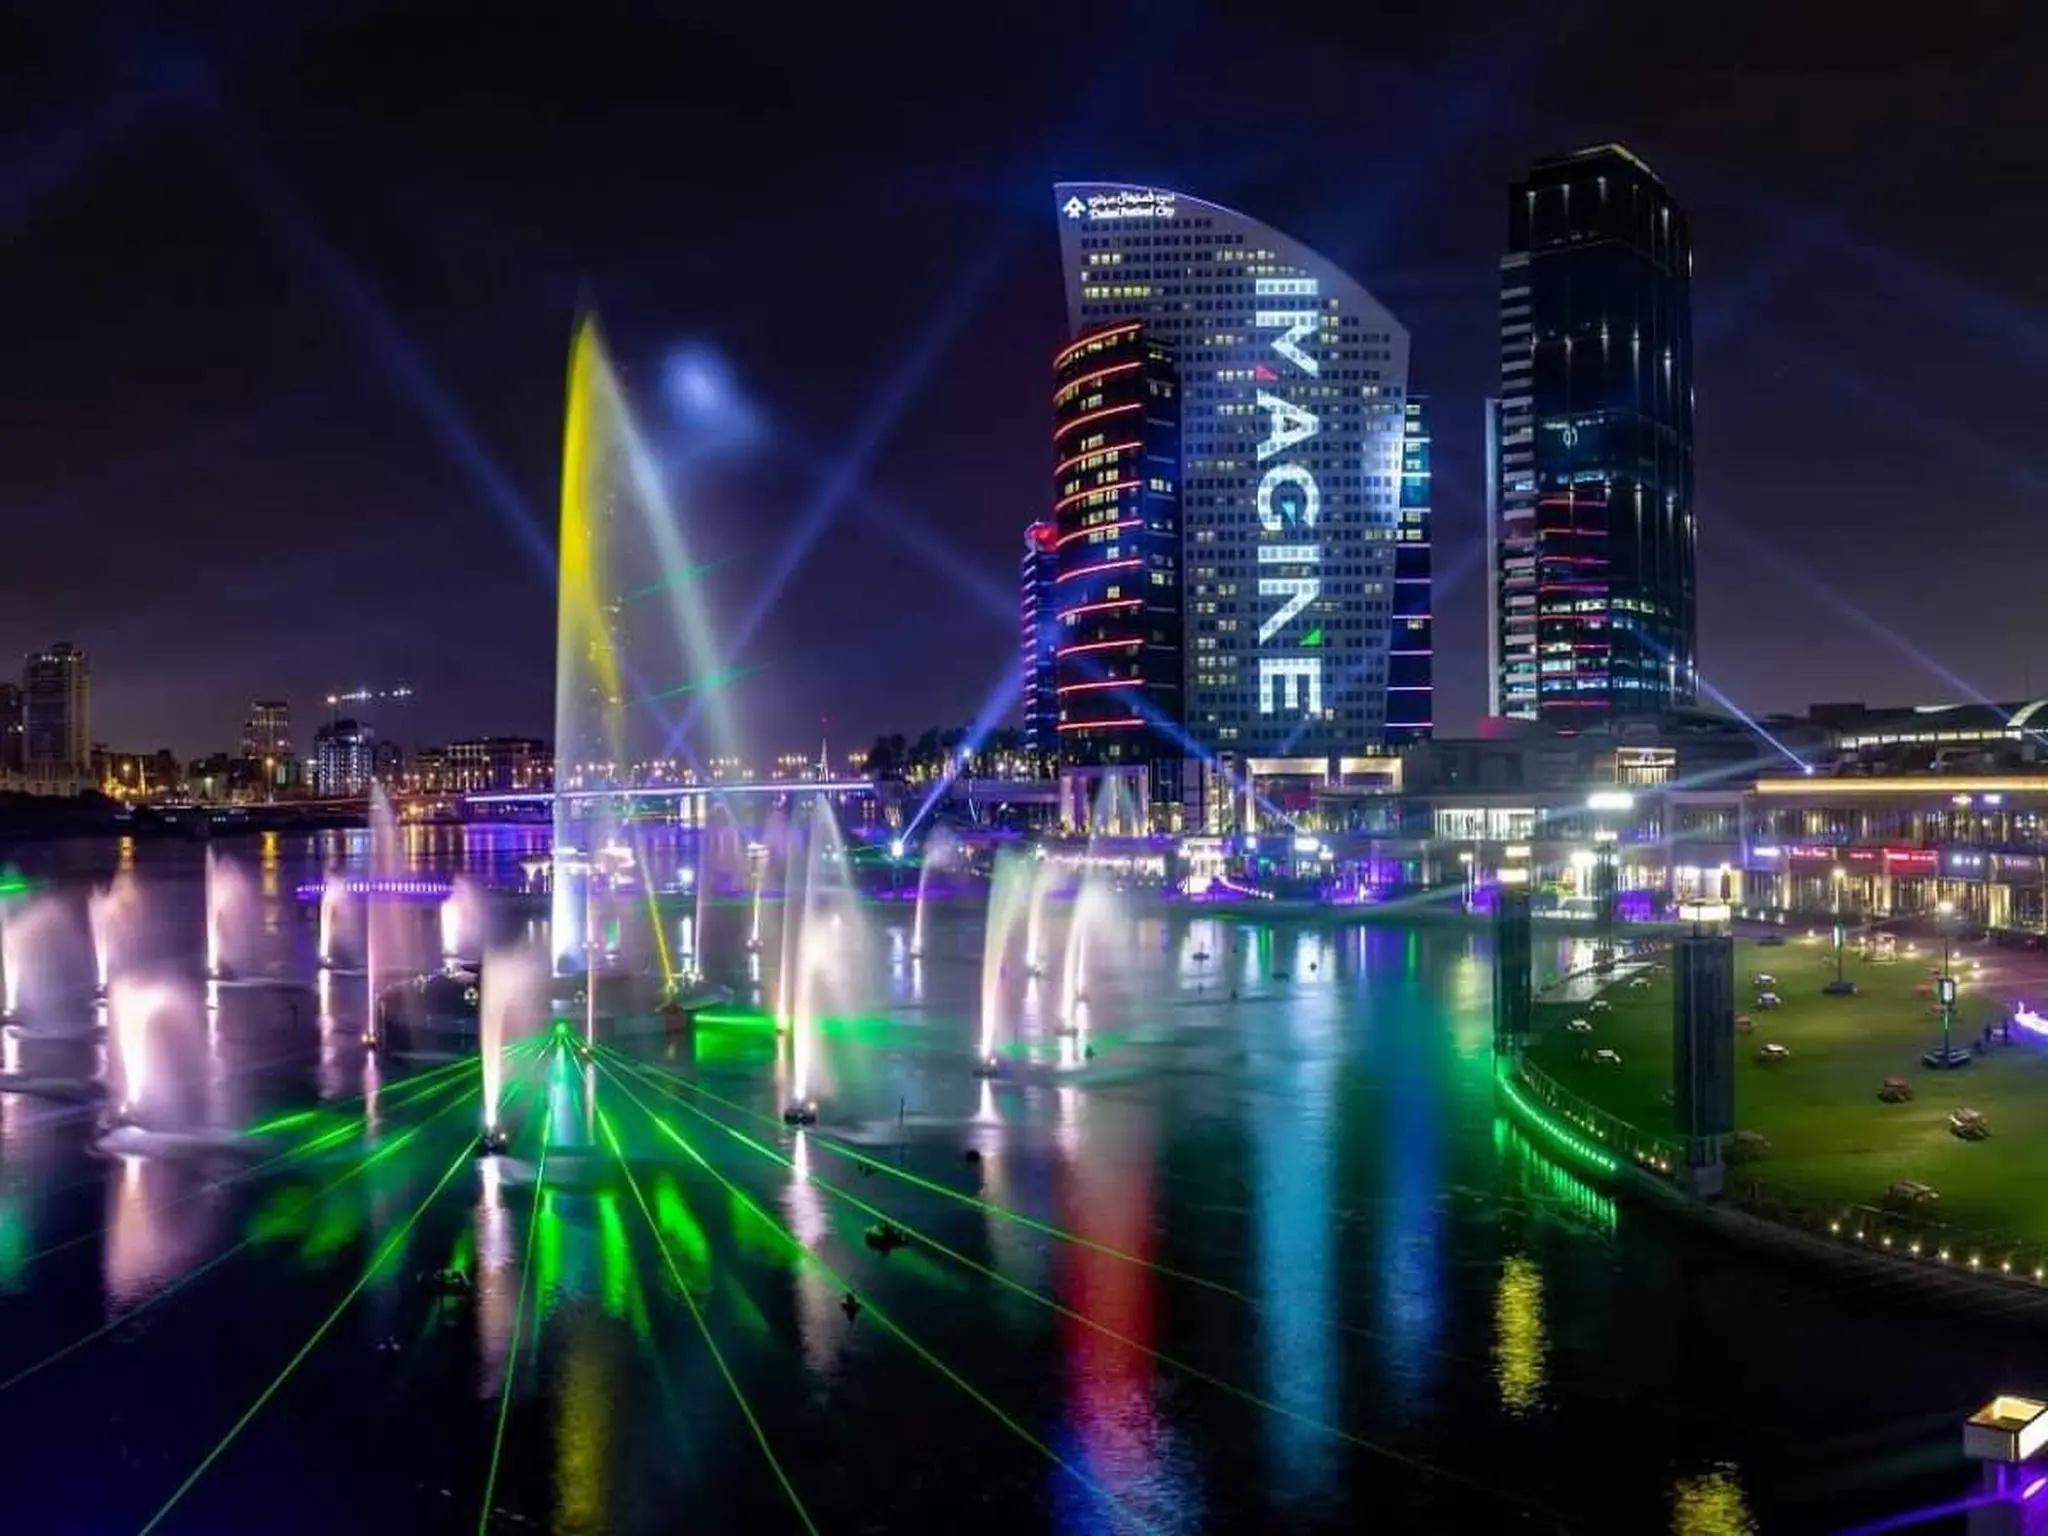 Dubai: Announcing the city's willingness to celebrate the New Year